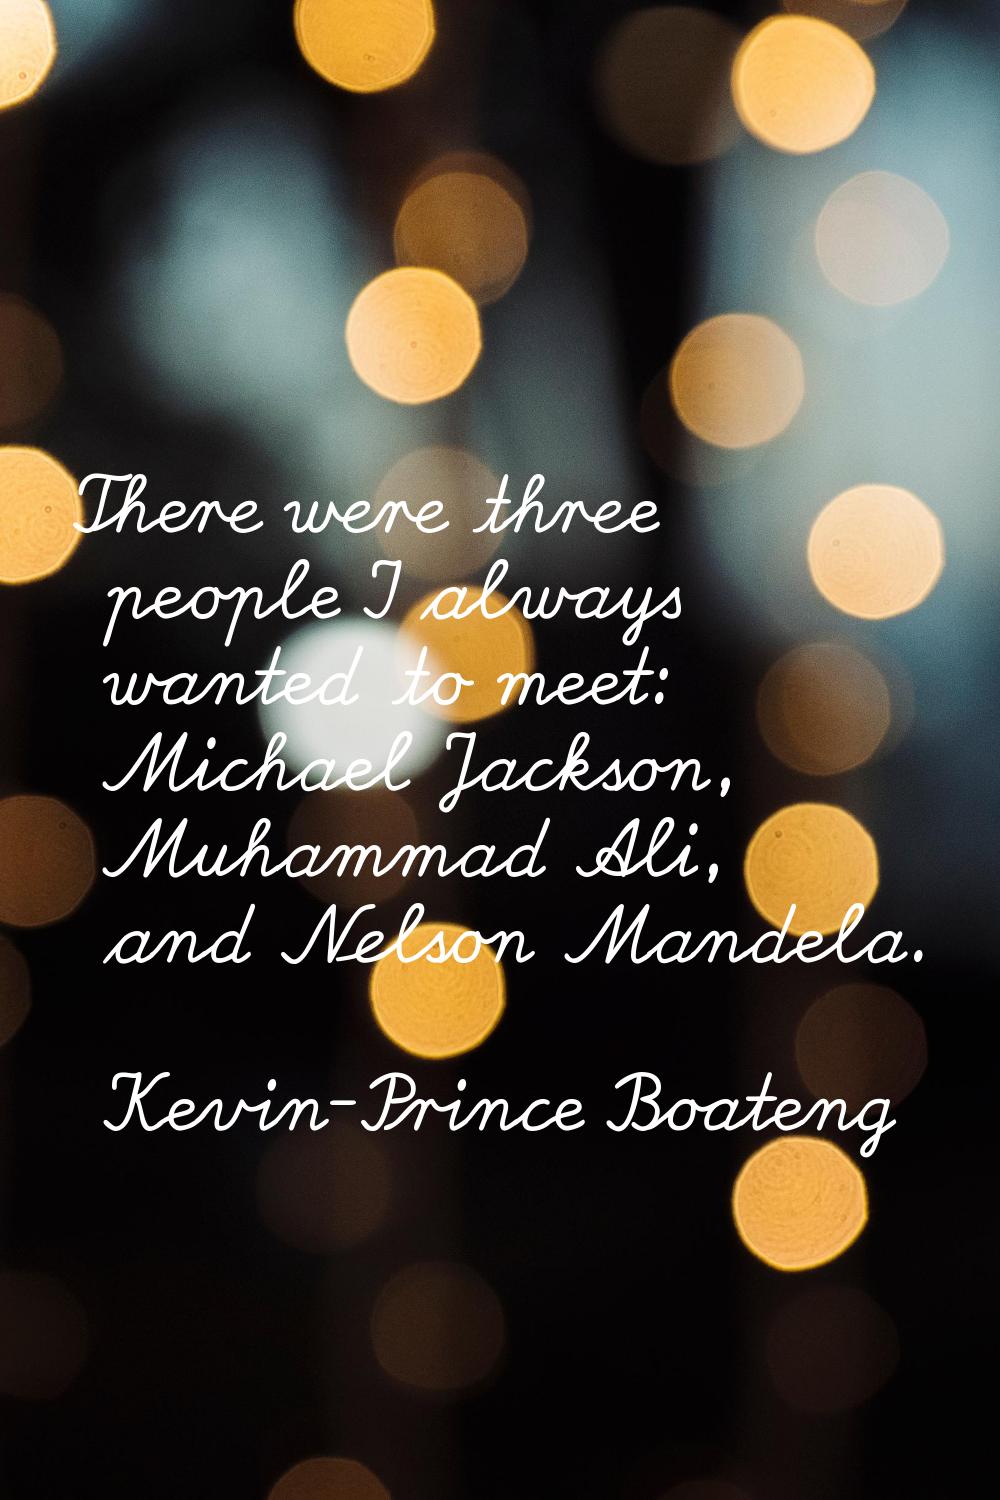 There were three people I always wanted to meet: Michael Jackson, Muhammad Ali, and Nelson Mandela.